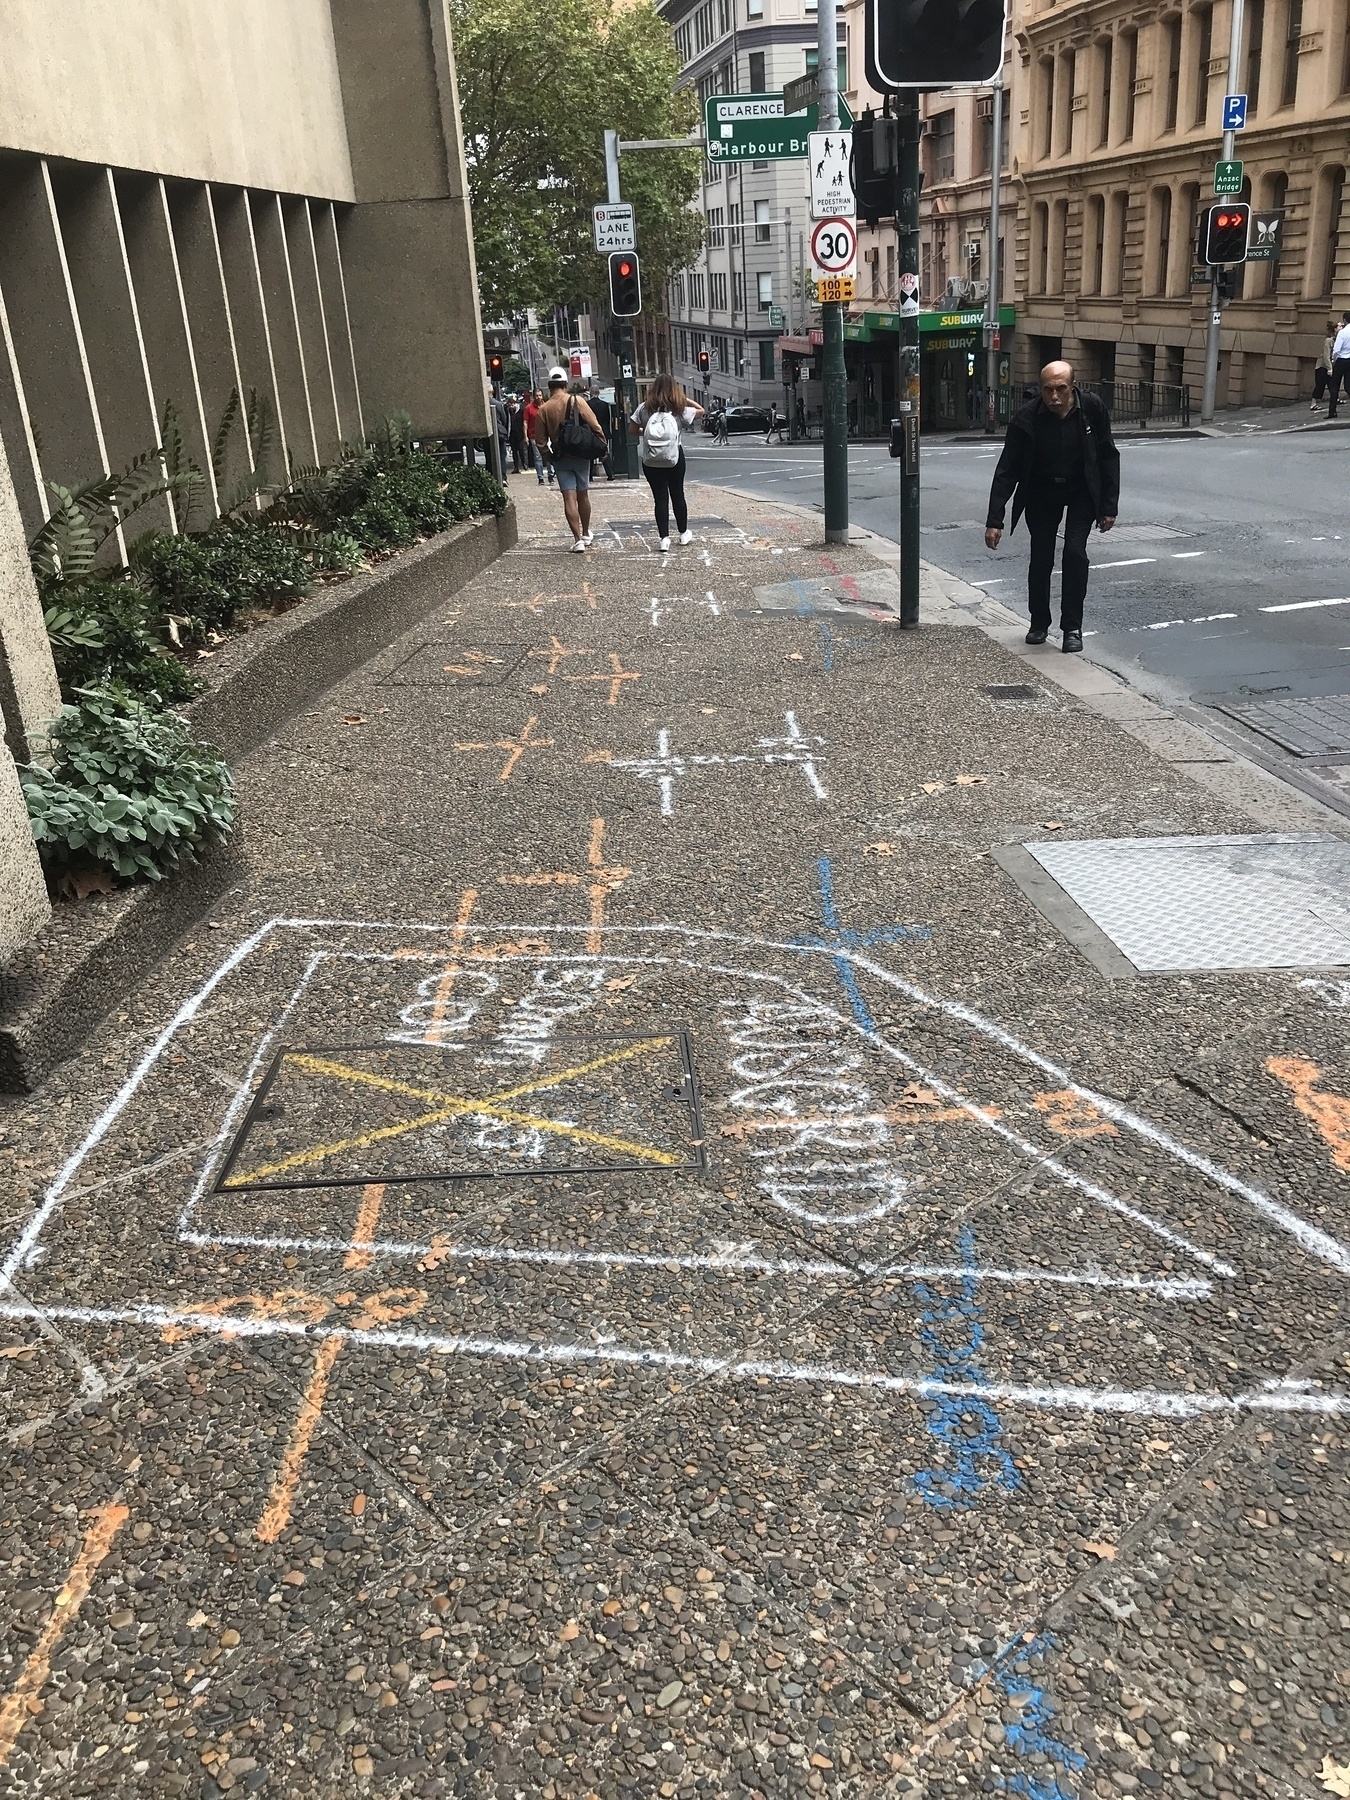 Beside a city street sloping sharply downhill, the wide footpath is covered with geometric shapes in orange, white, yellow, blue and red. Stick-aeroplane shapes in orange and white predominate, running down the slope in tandem, but there is are rectangles as well and lettering like 'Ausgrid' and '50mm Cov'. A stooped man in black looks uphill at the camera.